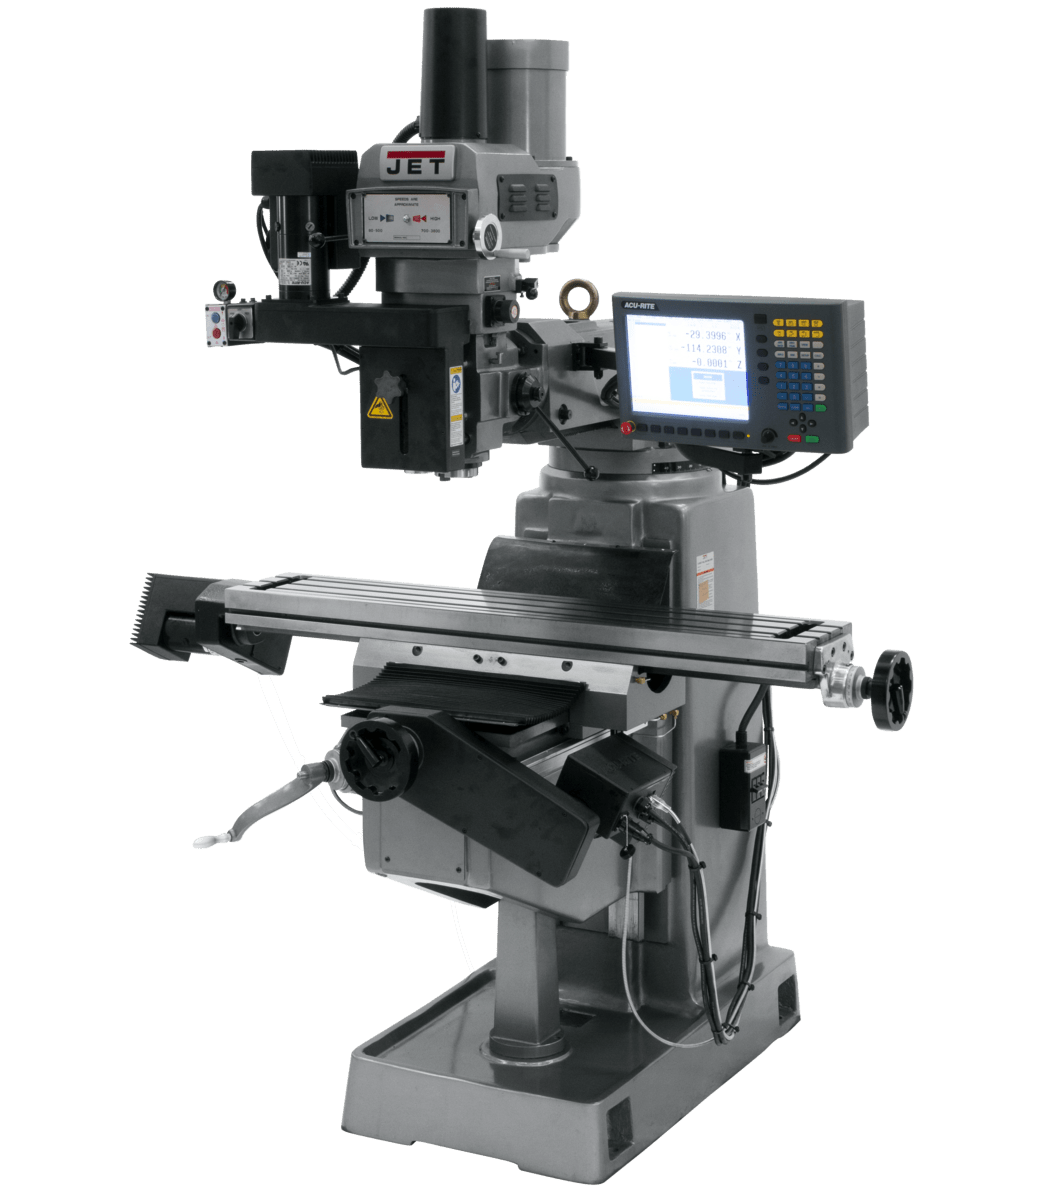 Jet JTM-4VS Mill with 3-Axis ACU-RITE G-2 MILLPWR CNC with Air Powered Draw Bar